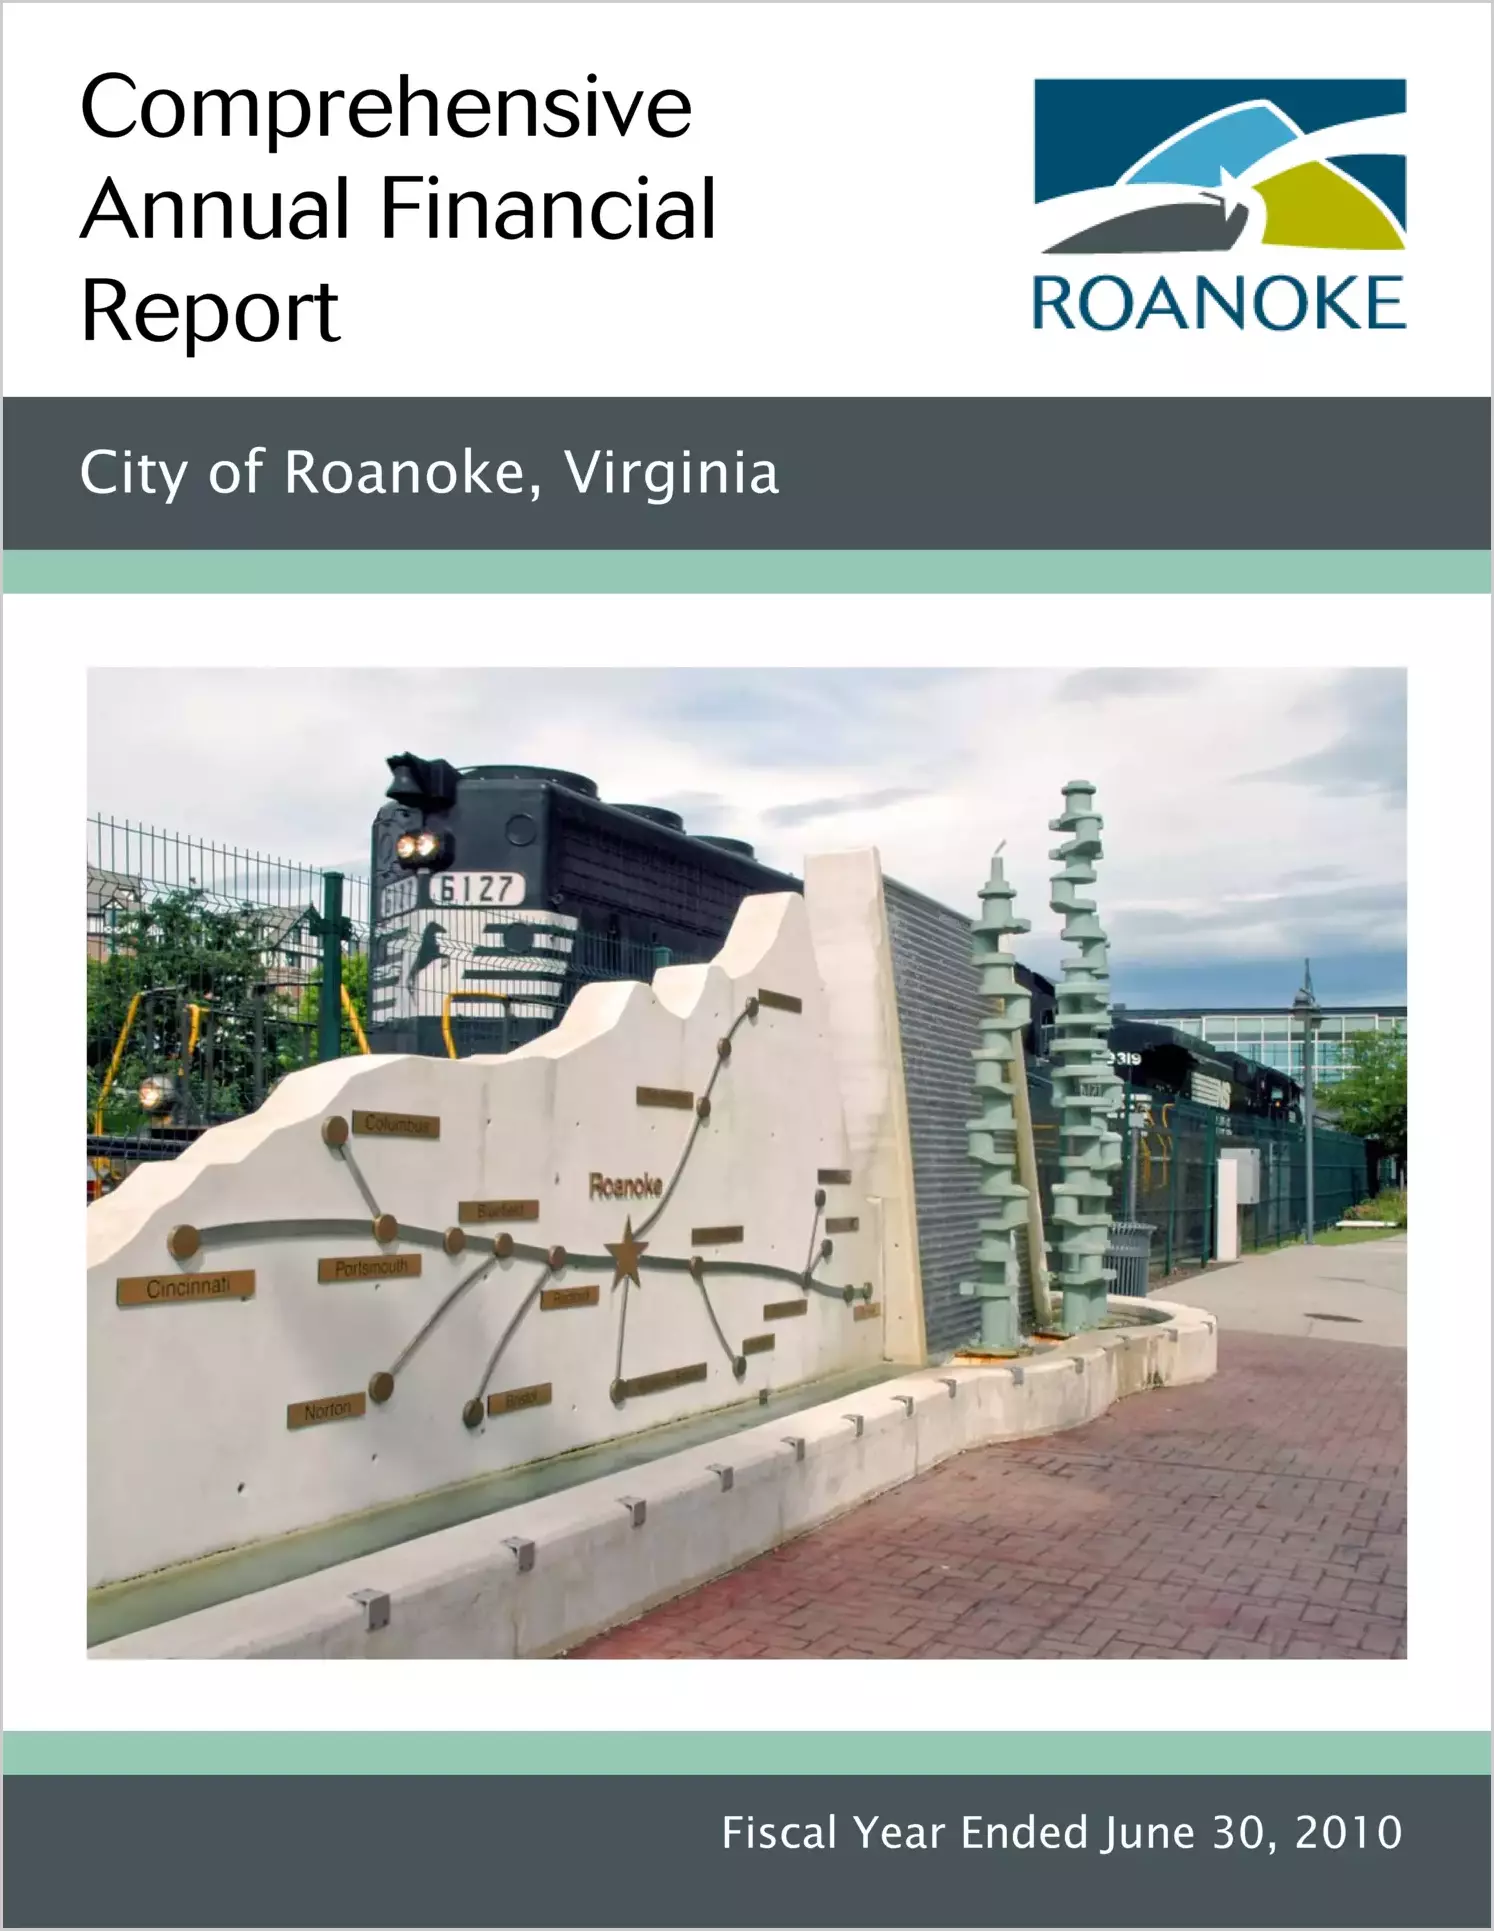 2010 Annual Financial Report for City of Roanoke